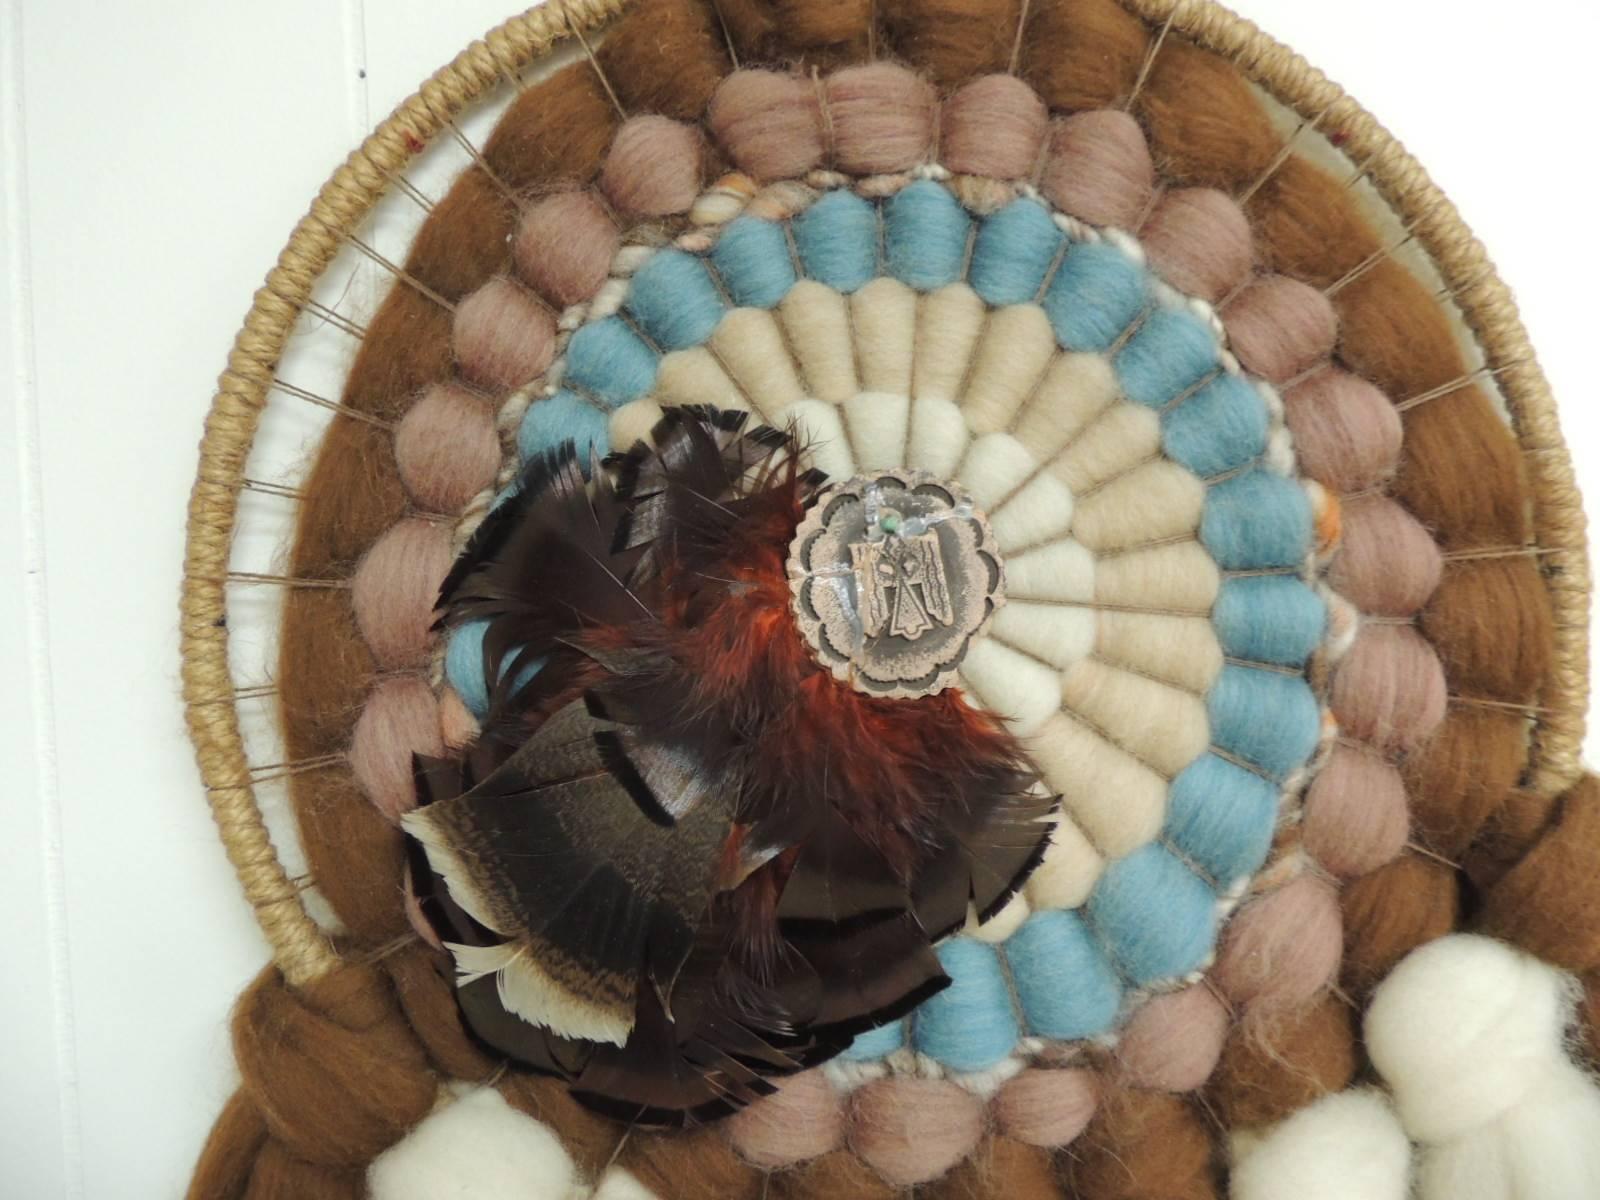 This item is part of our 7Th Anniversary SALE:
American Indian round wall hanging sculpture made with feathers, wool, leather, twisted yarns and wood. Boho-Chic artisanal, hand made wall art.
The dream catcher has been a part of Native American